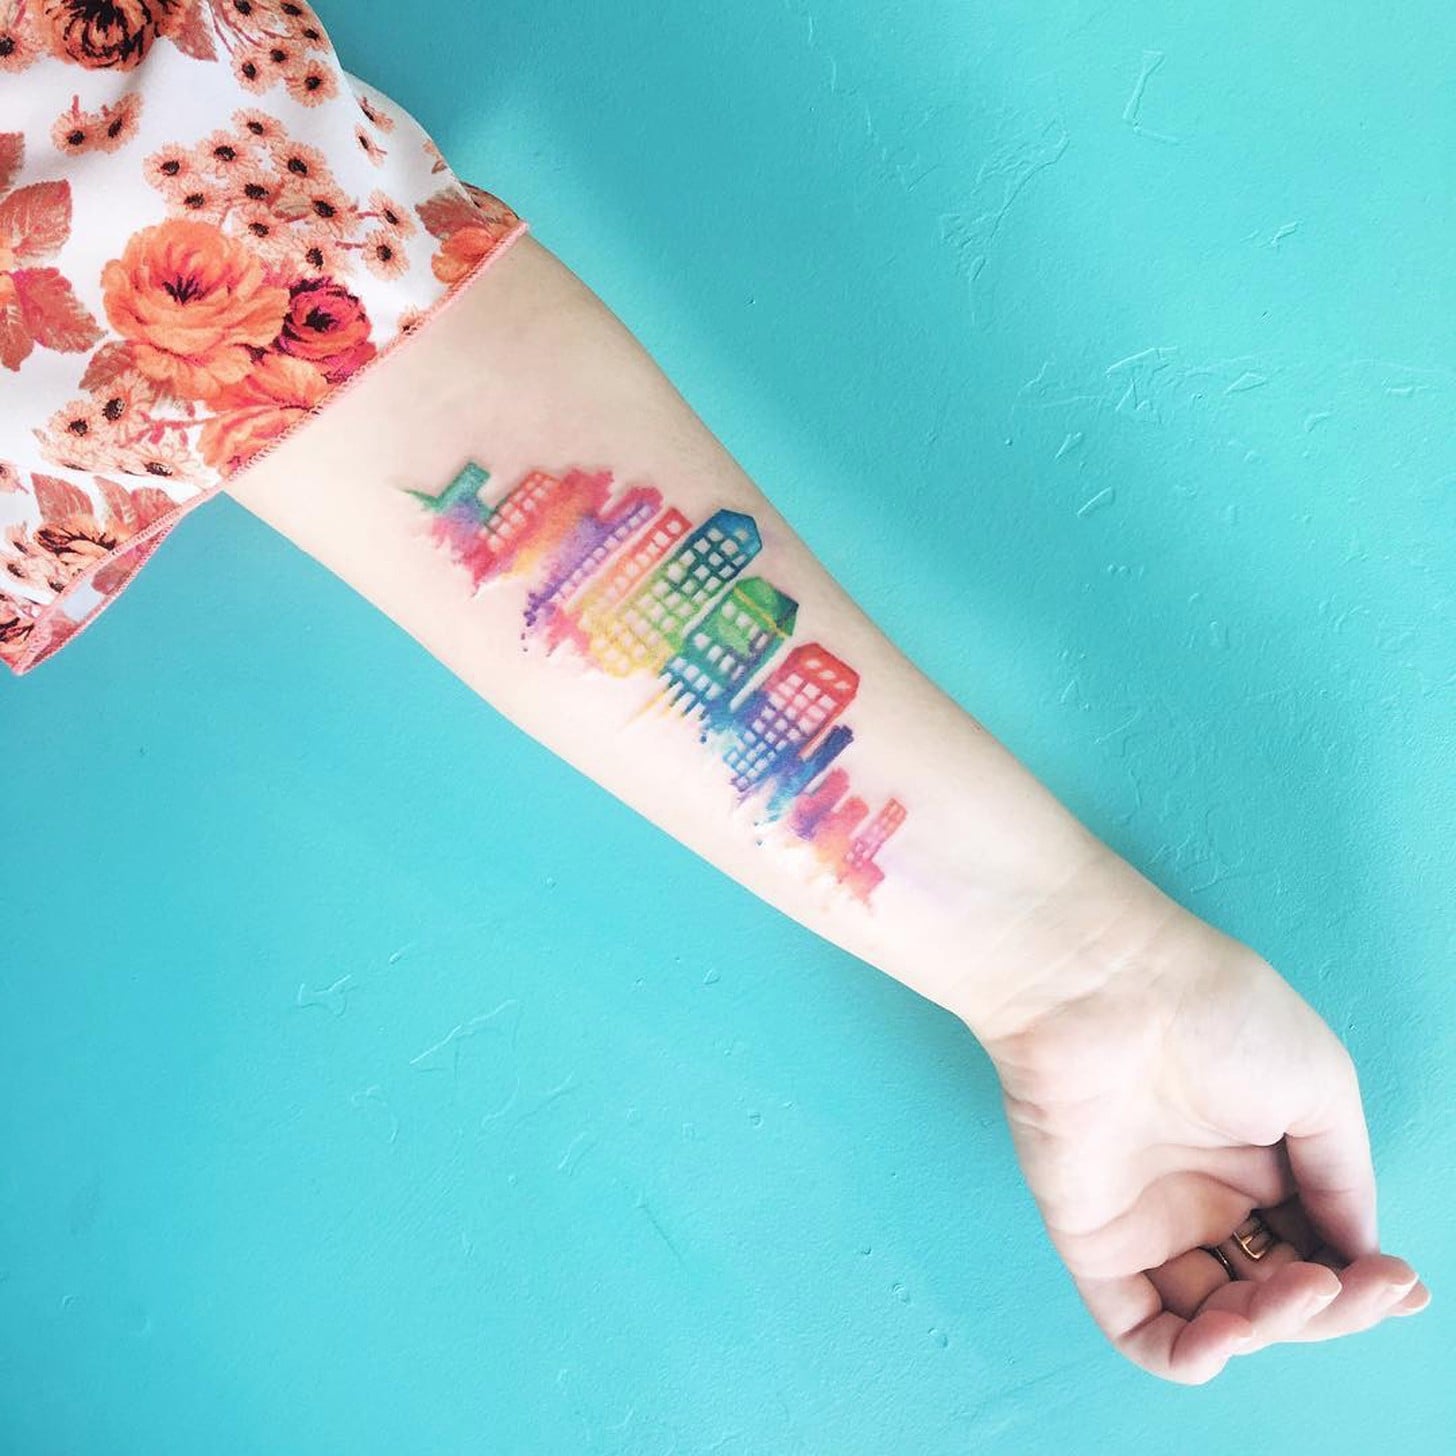 23 NYC Skyline Tattoos With Meanings  TattoosWin